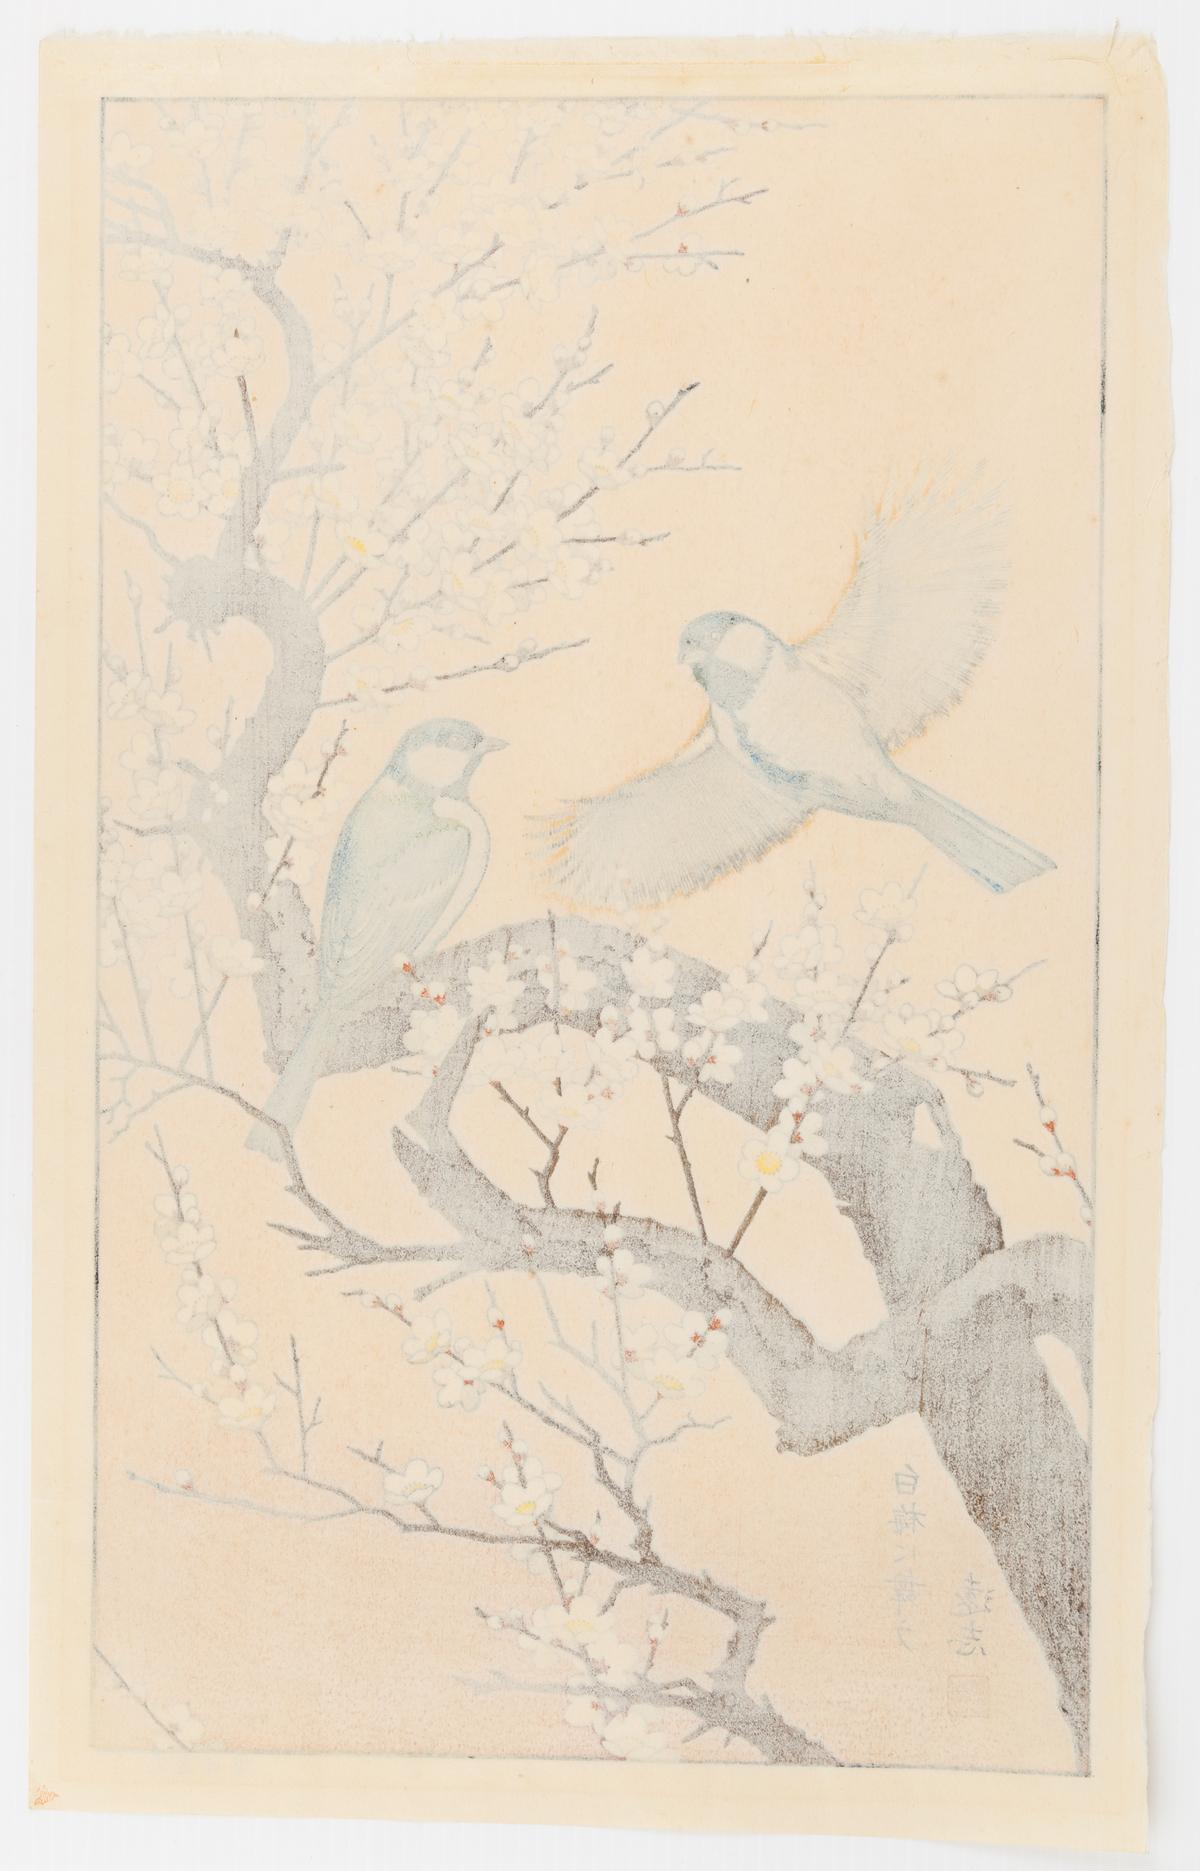 Artist: Toshi Yoshida (1911-1995)
Title: Flying around the Plum Tree - Spring
Series: Birds of the Seasons 
Date: late 20th century
Original pencil signature.
Size: 33.8 x 54 cm
Condition: Light brown mark along the edge of the image due to the